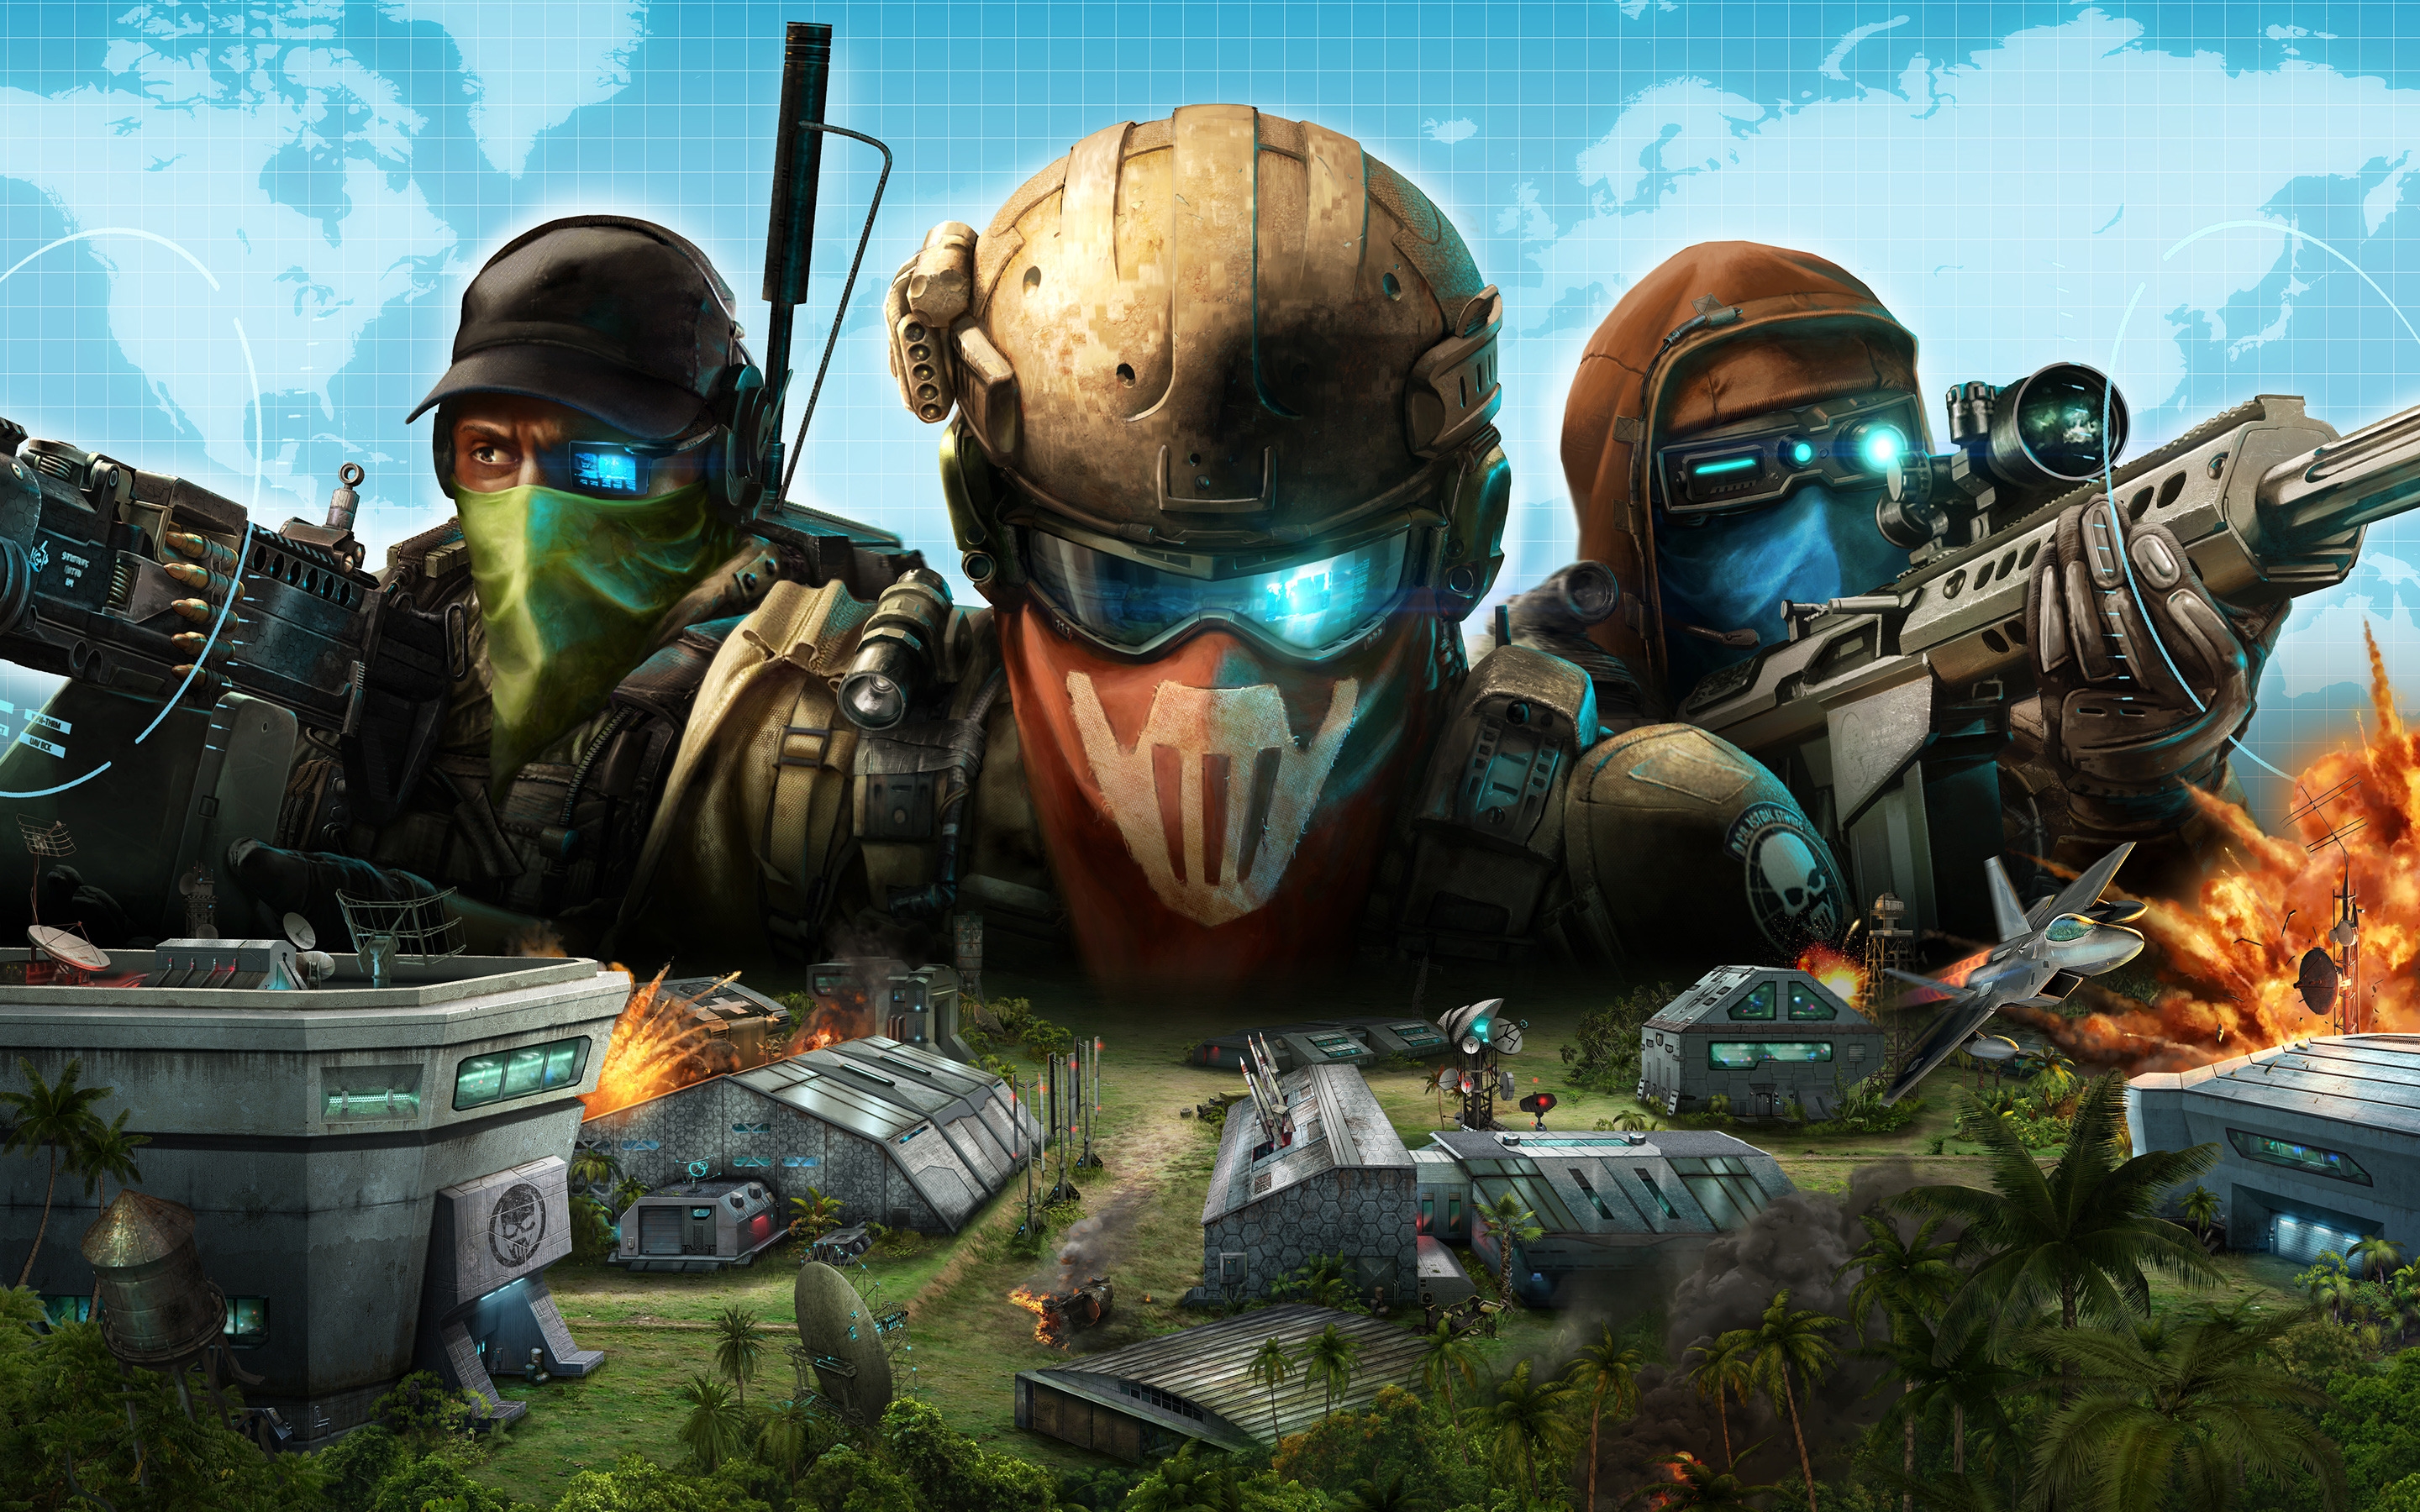 Ghost Recon Commander for 2880 x 1800 Retina Display resolution